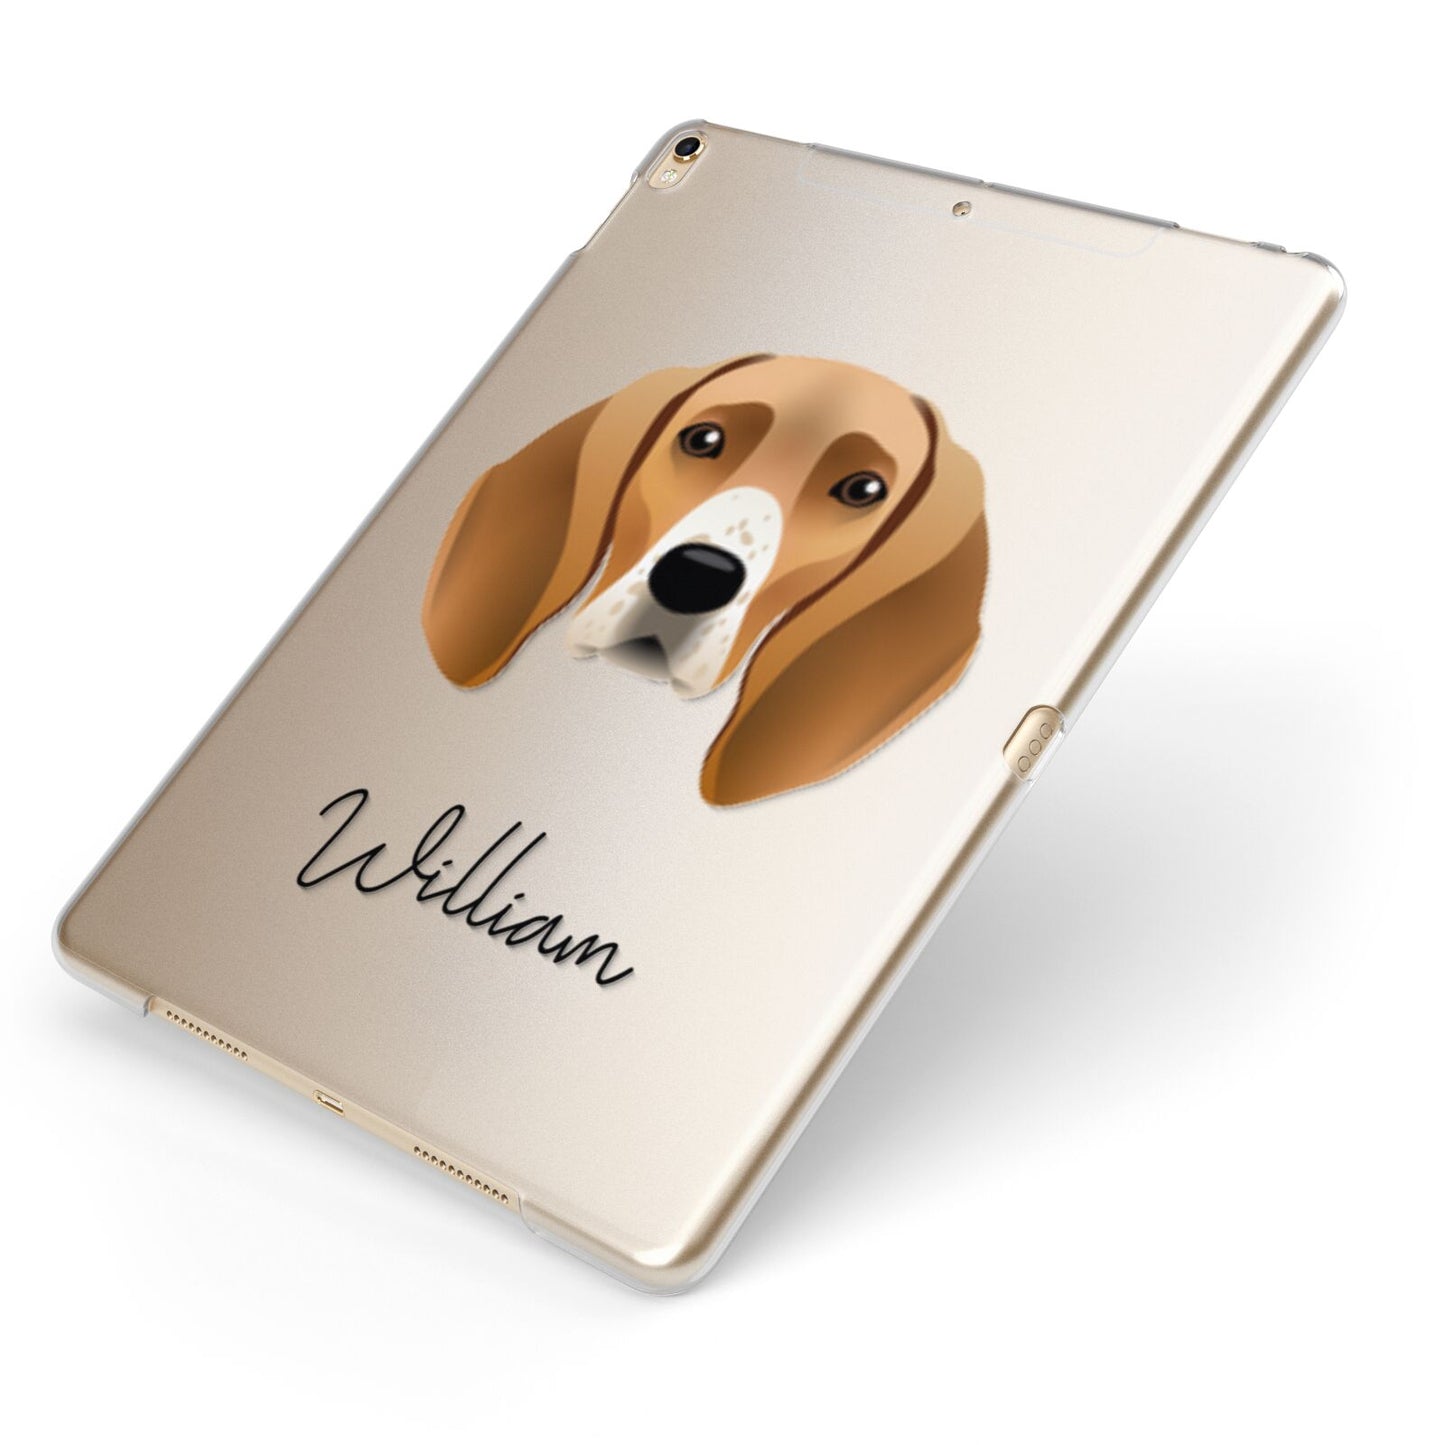 Foxhound Personalised Apple iPad Case on Gold iPad Side View